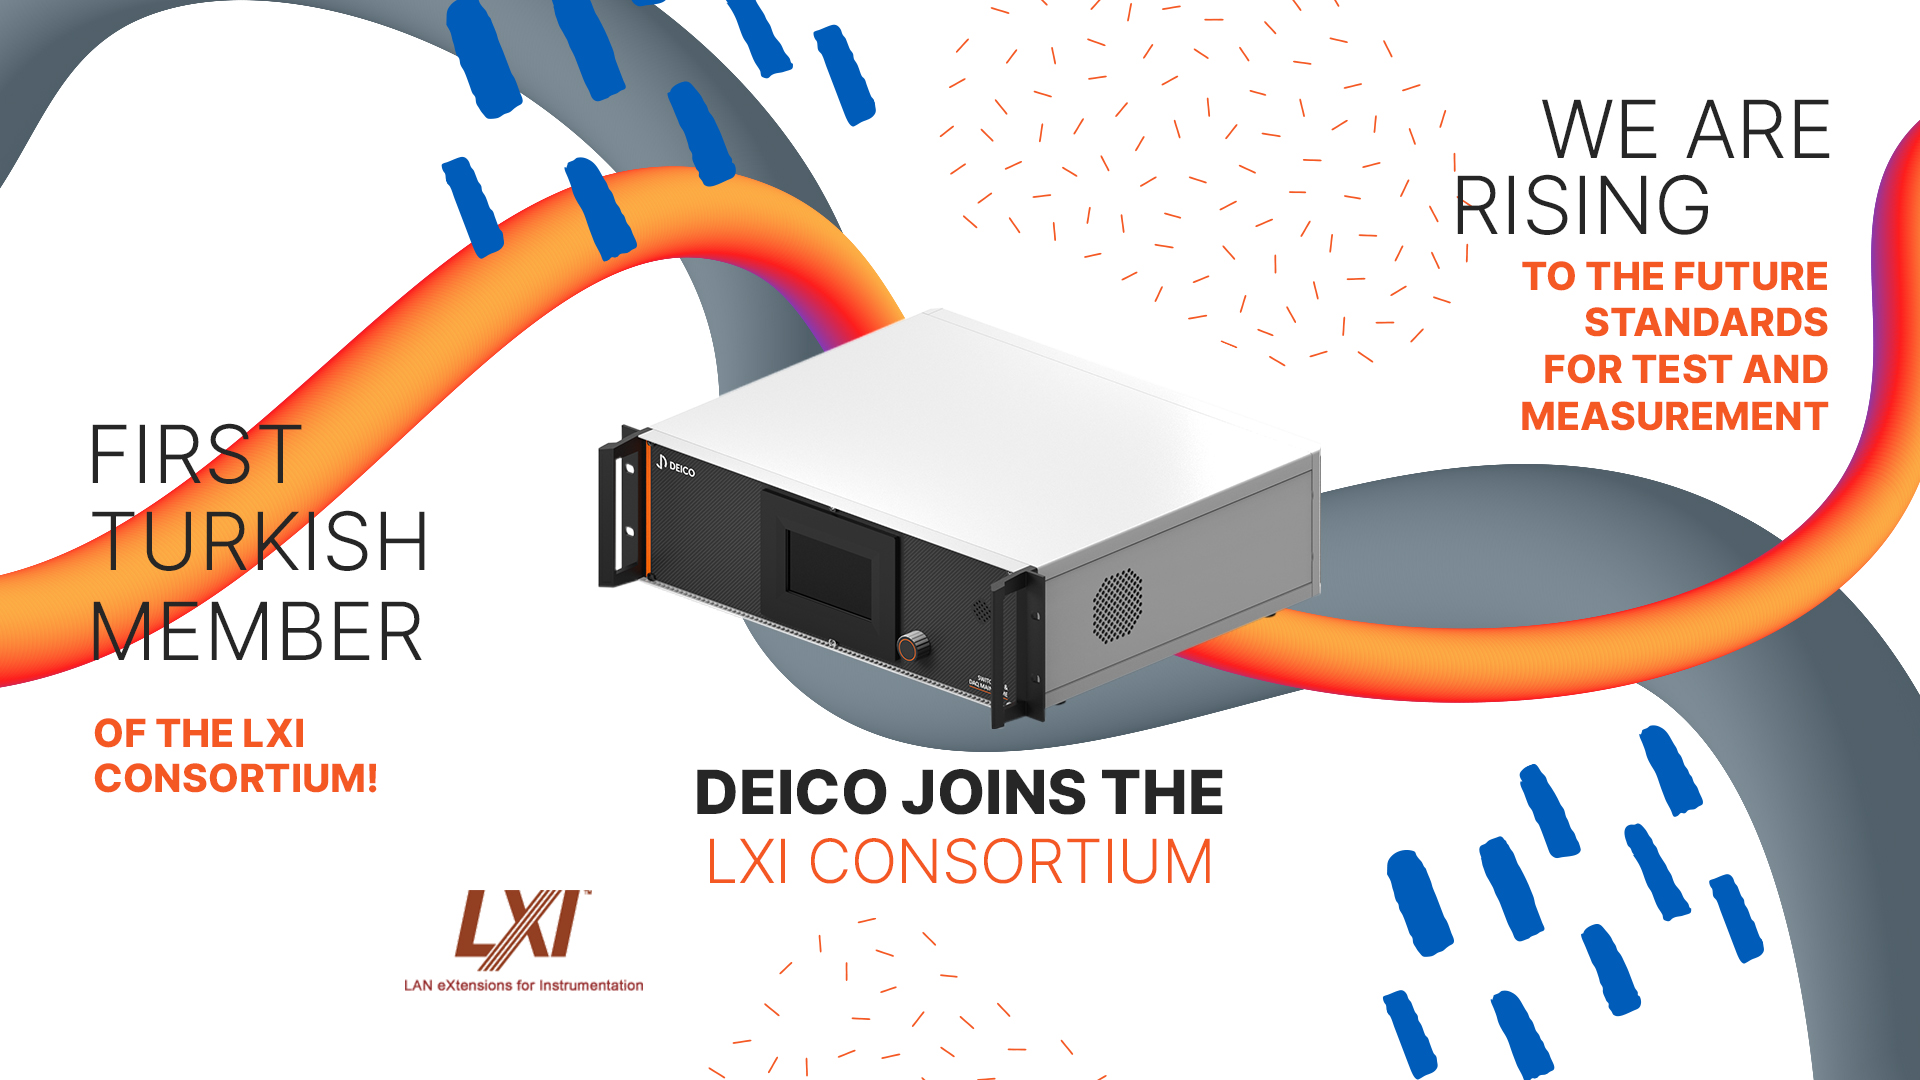 DEICO Joins the LXI Consortium!